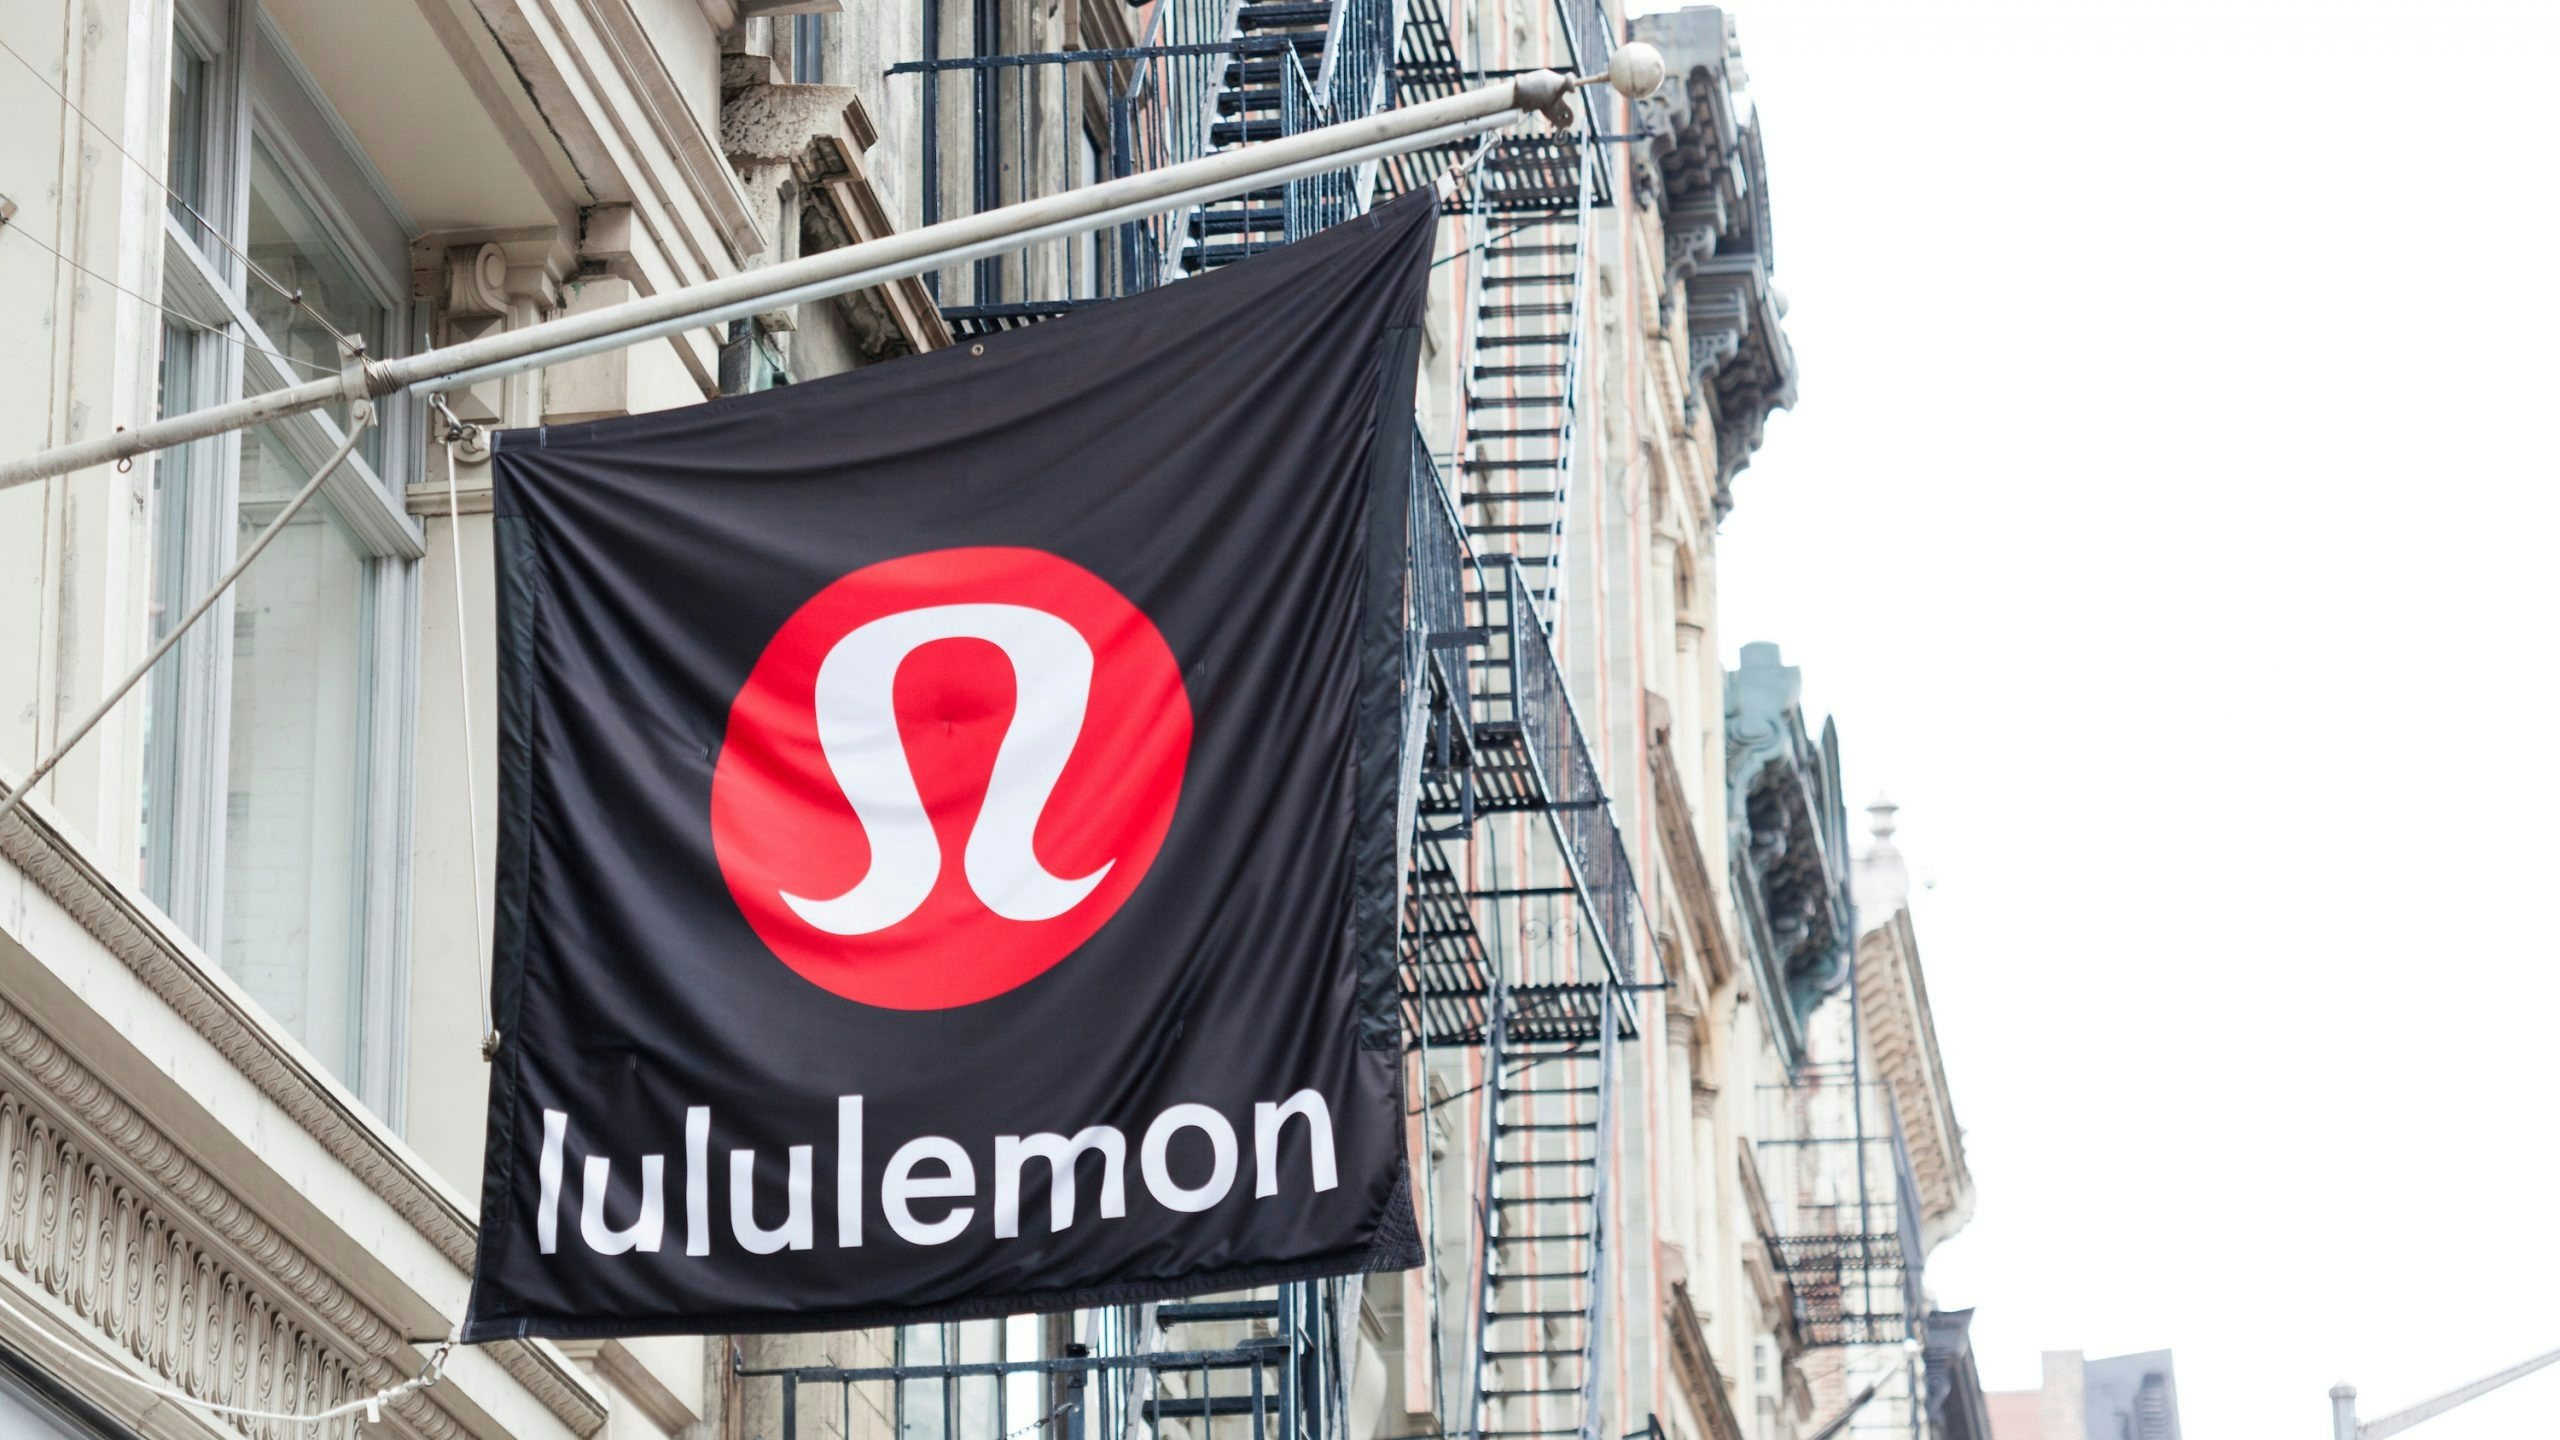 Lululemon officially distanced itself from the offensive T-shirt promoter, but many Chinese netizens are still blaming the brand for racism. Photo: Shutterstock